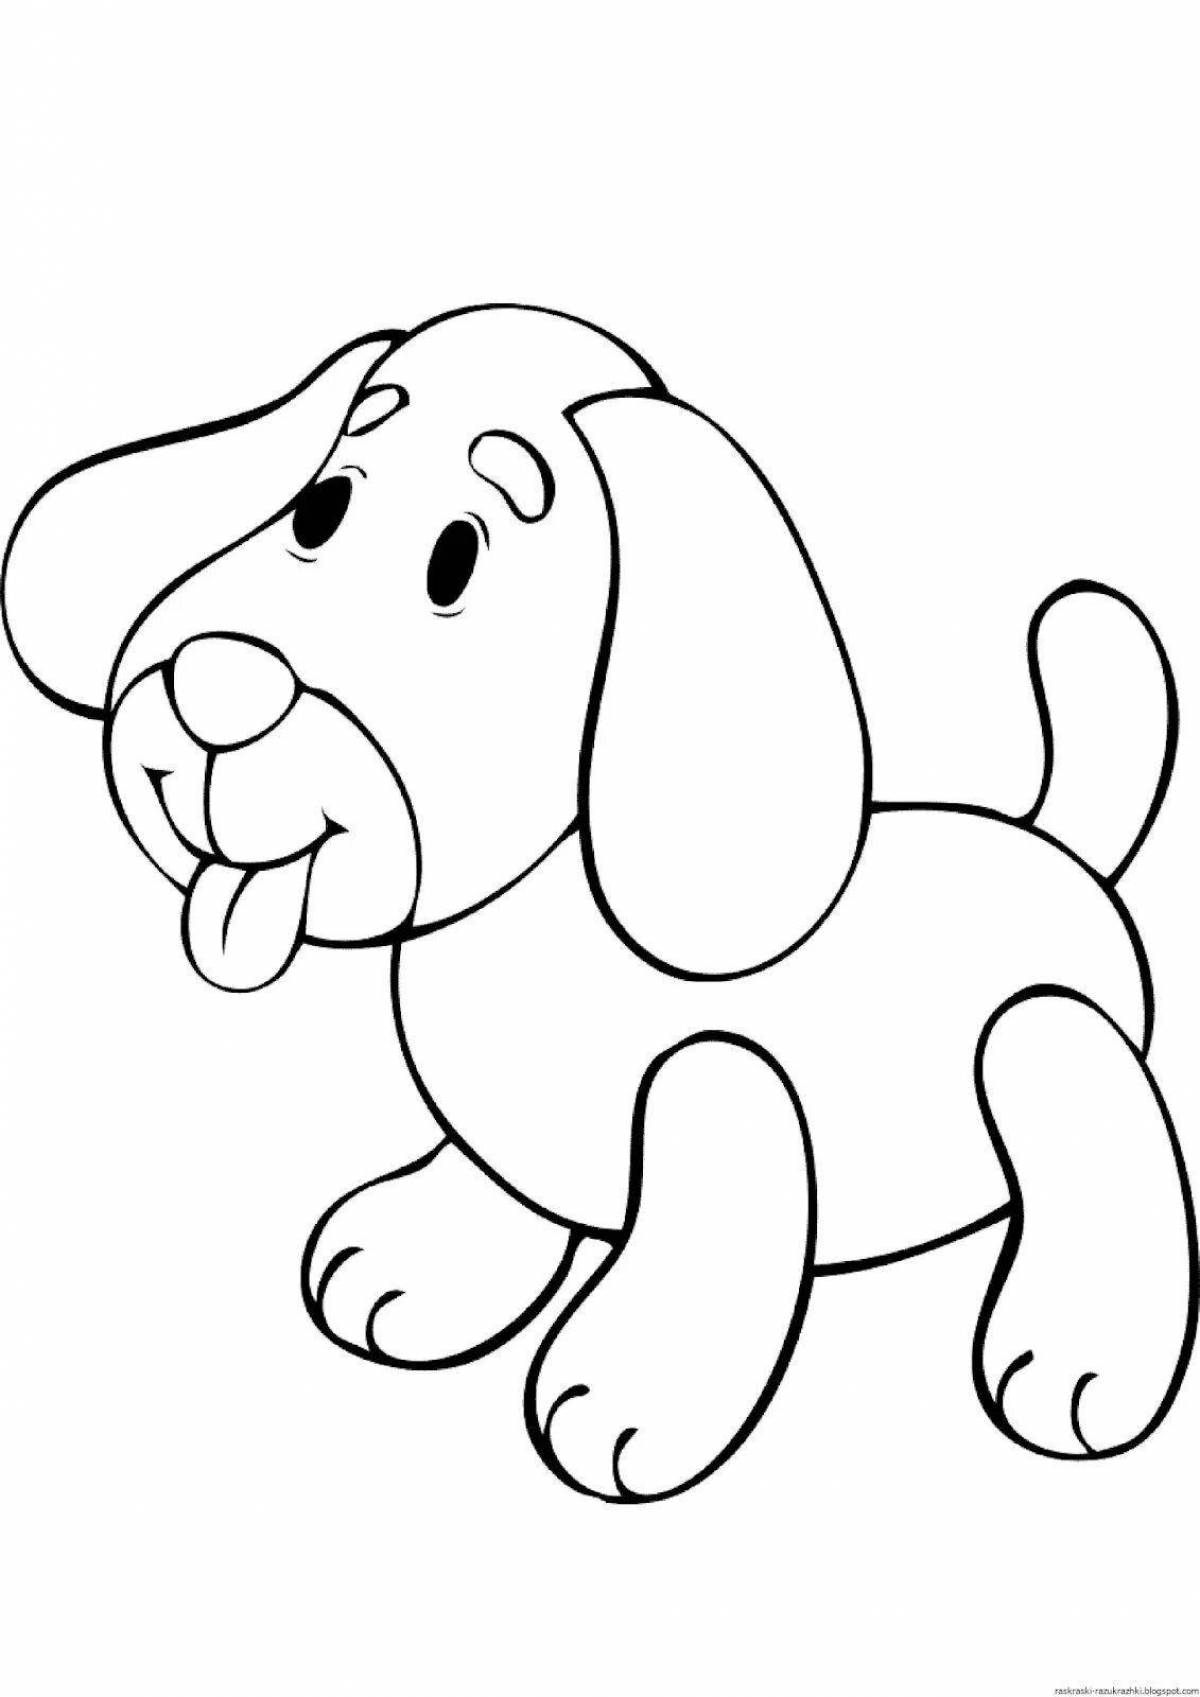 Coloring dog for children 2-3 years old